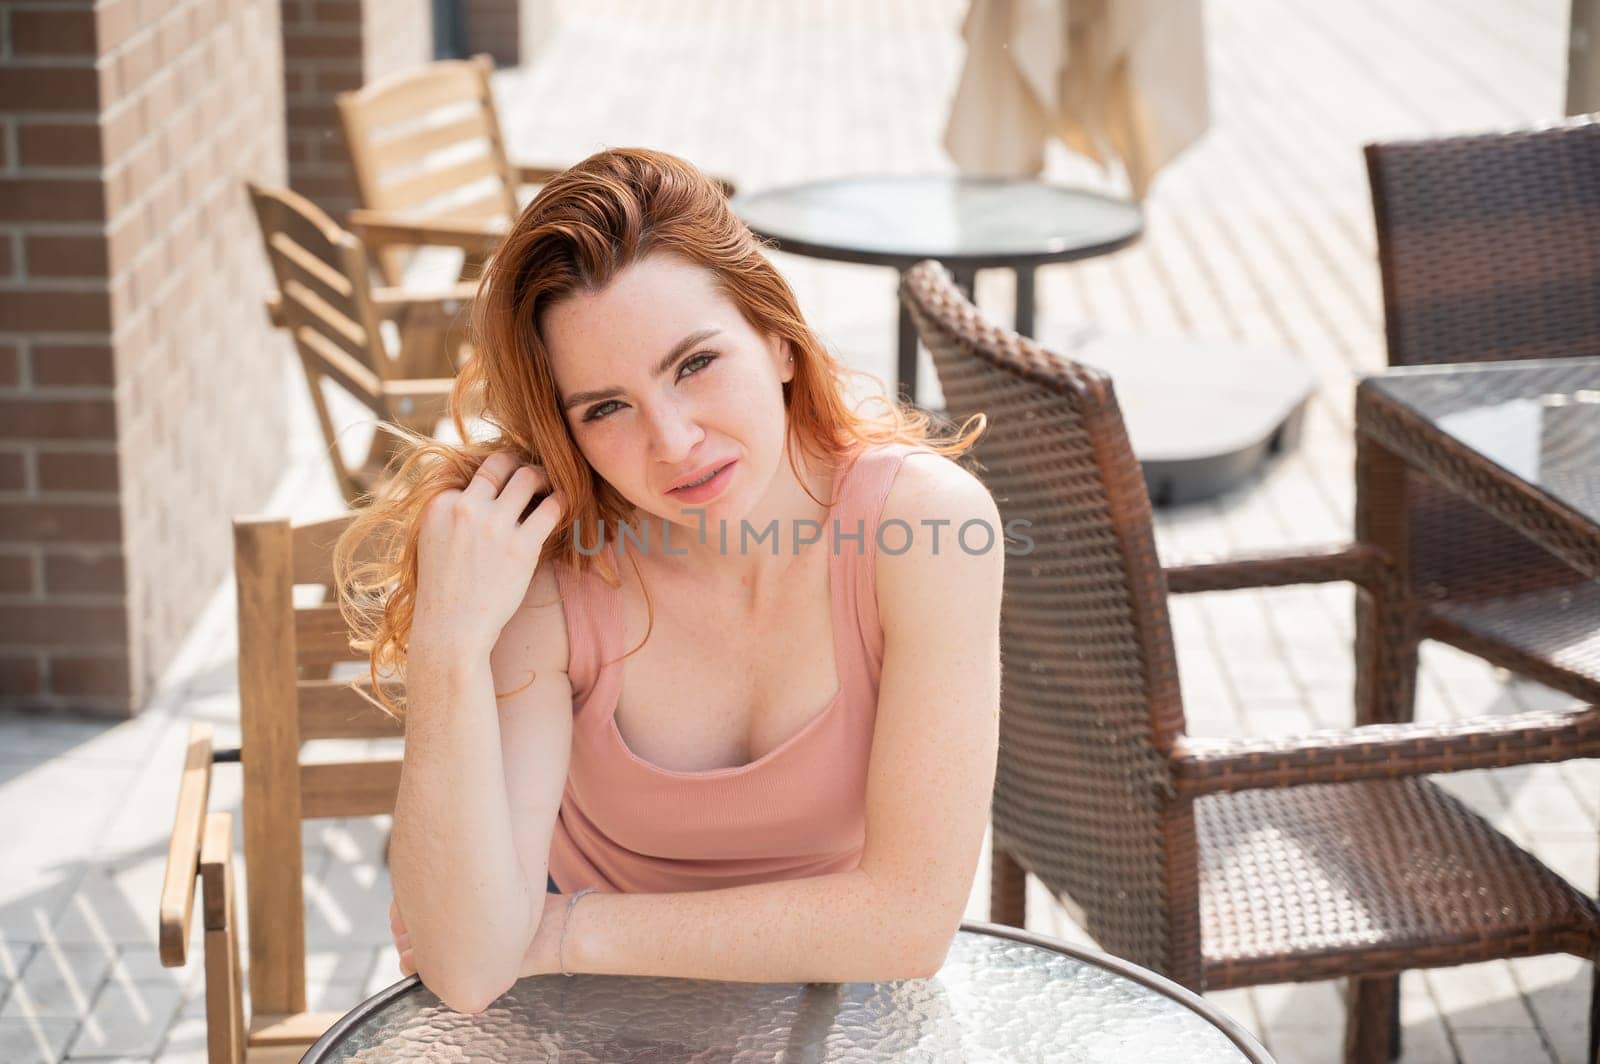 Beautiful young red-haired woman with braces on her teeth smiling while sitting in an outdoor cafe. by mrwed54